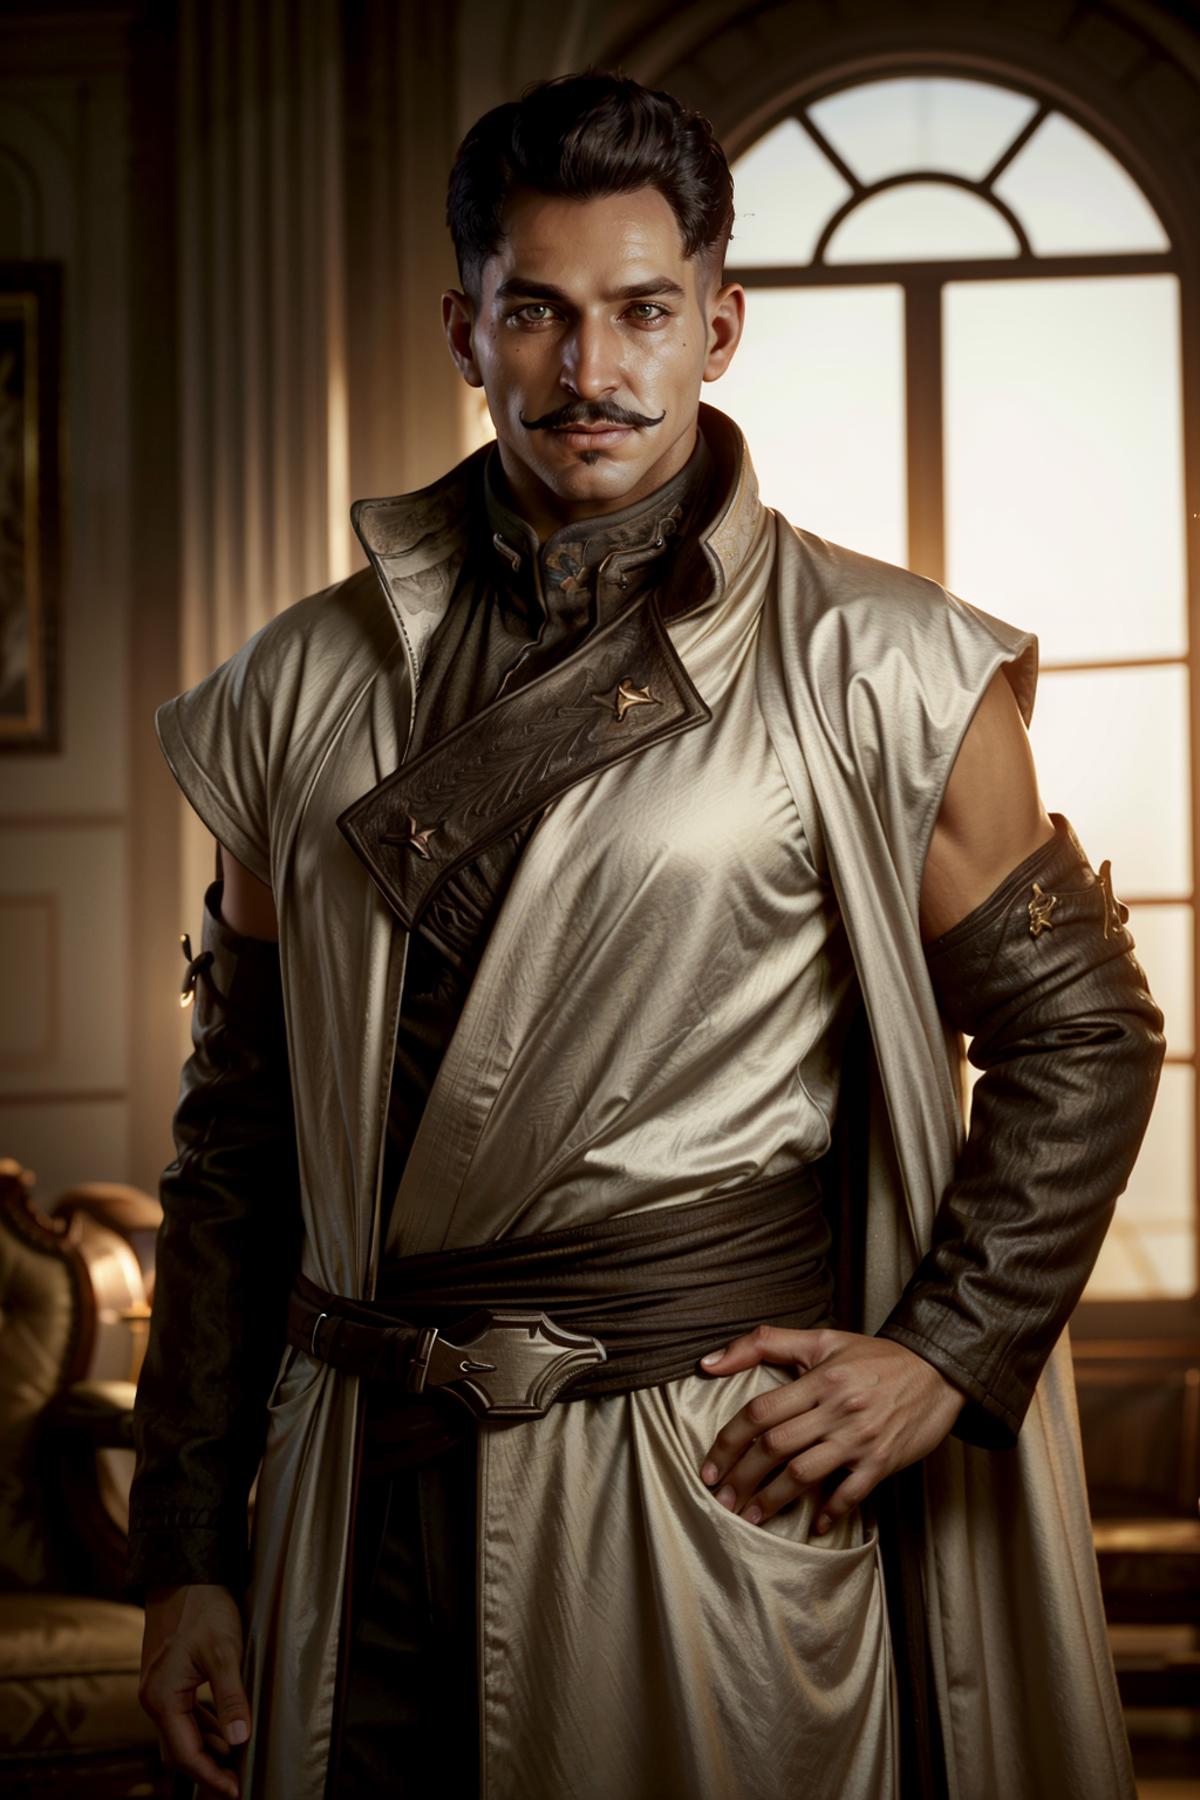 Dorian from Dragon Age: Inquisition image by BloodRedKittie